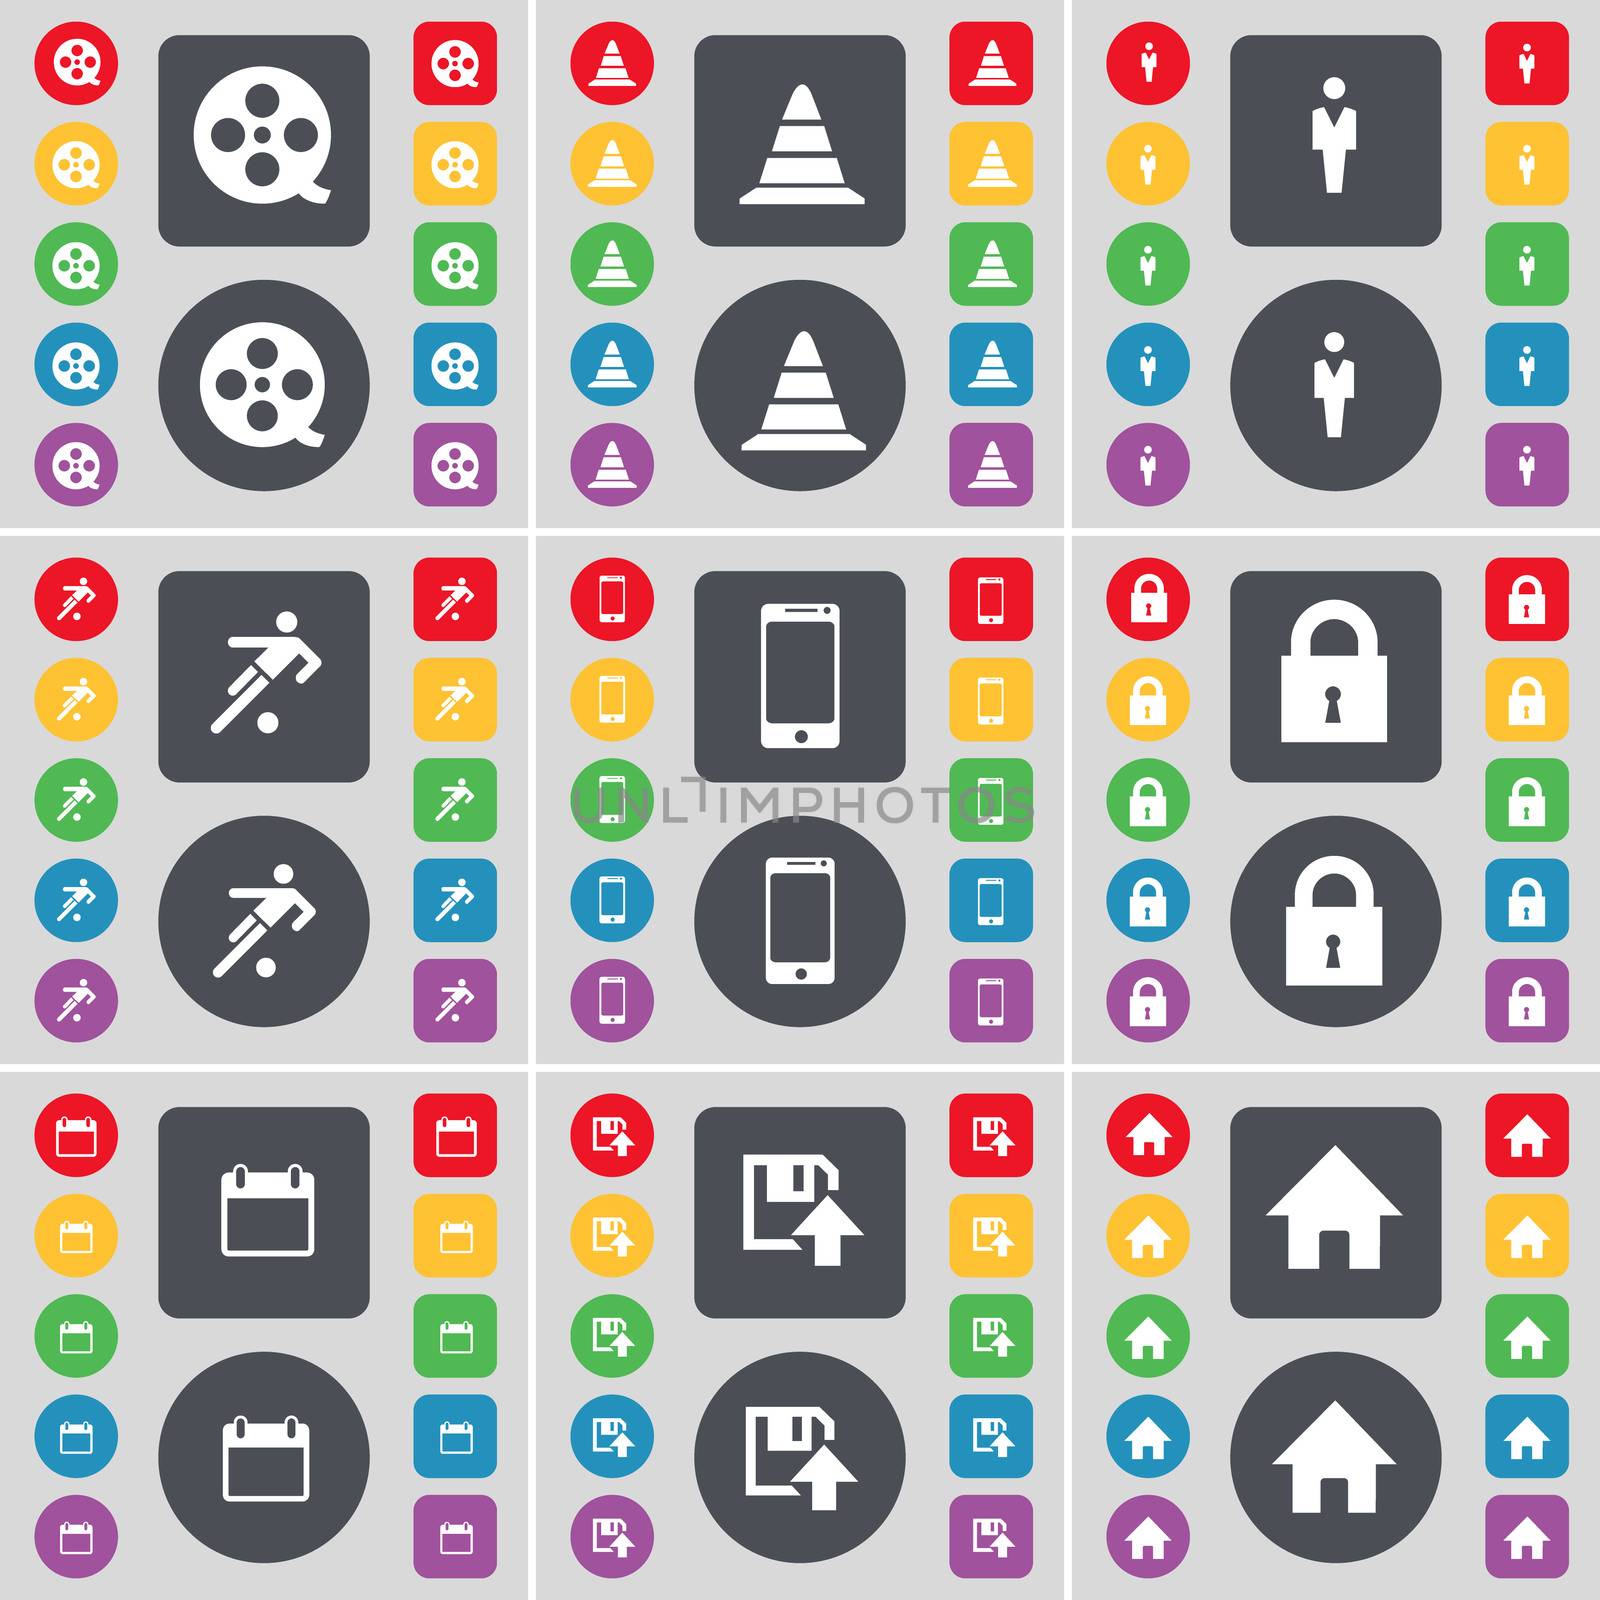 Videotape, Cone, Silhouette, Football, Smartphone, Lock, Calendar, Floppy, House icon symbol. A large set of flat, colored buttons for your design.  by serhii_lohvyniuk